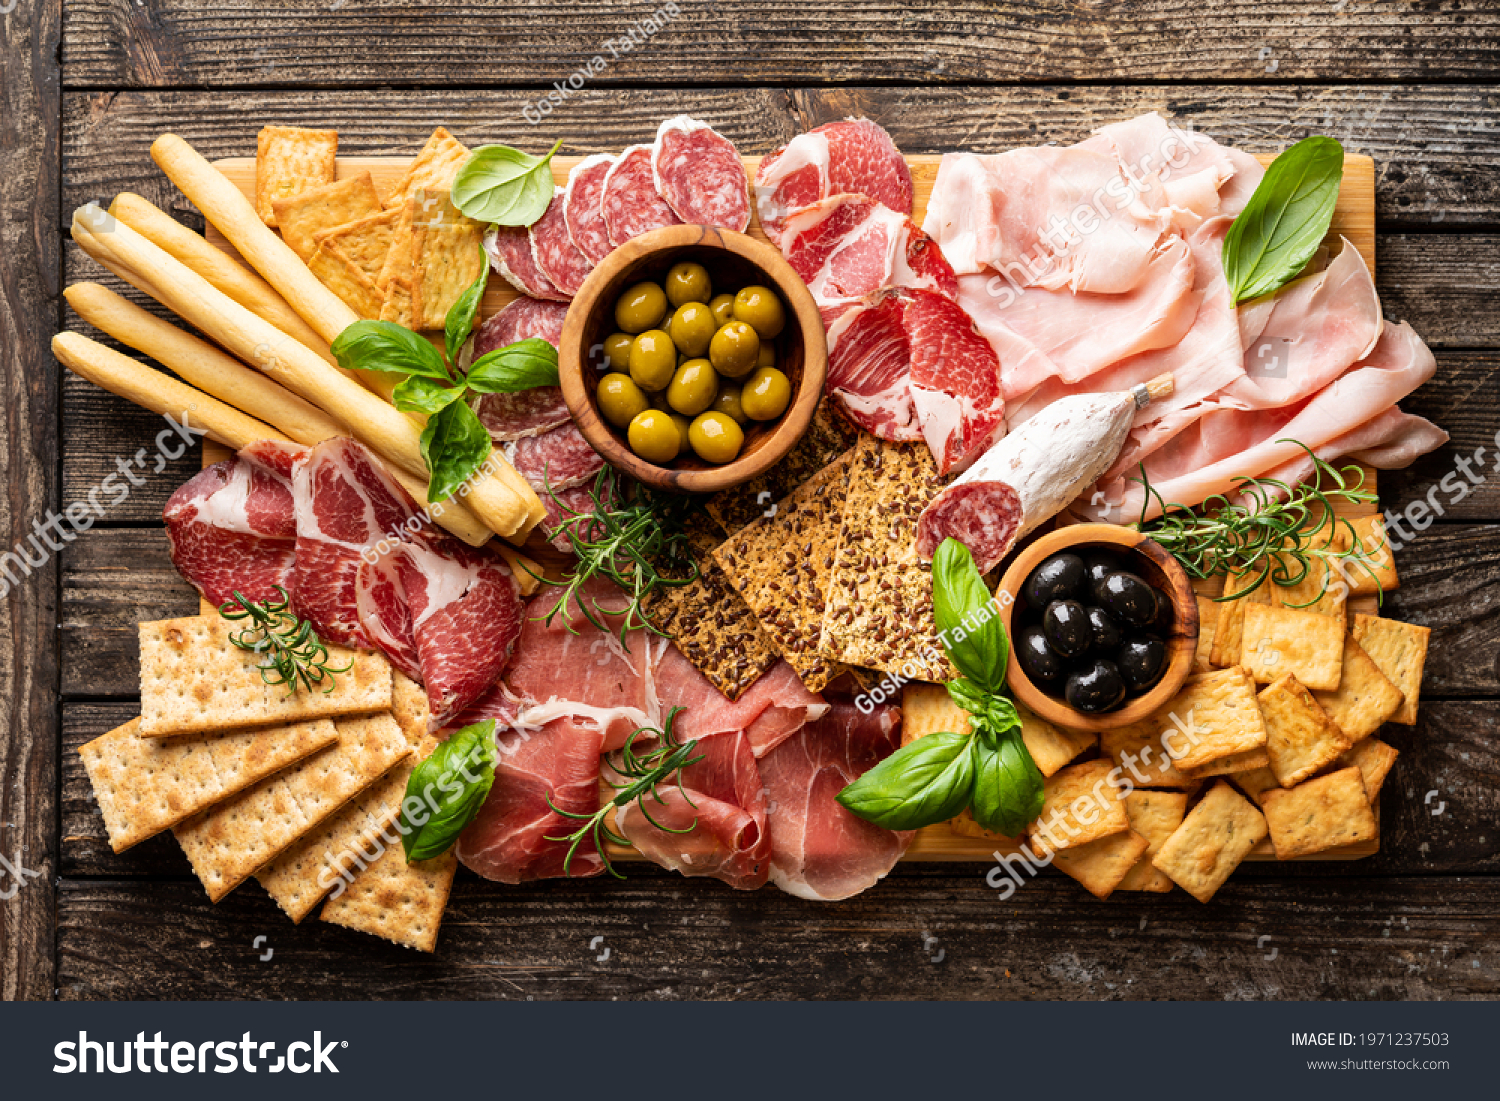 Appetizers with differents antipasti, charcuterie, snacks and red wine. Sausage, ham, tapas, olives and crackers for buffet party. Top view, flat lay #1971237503